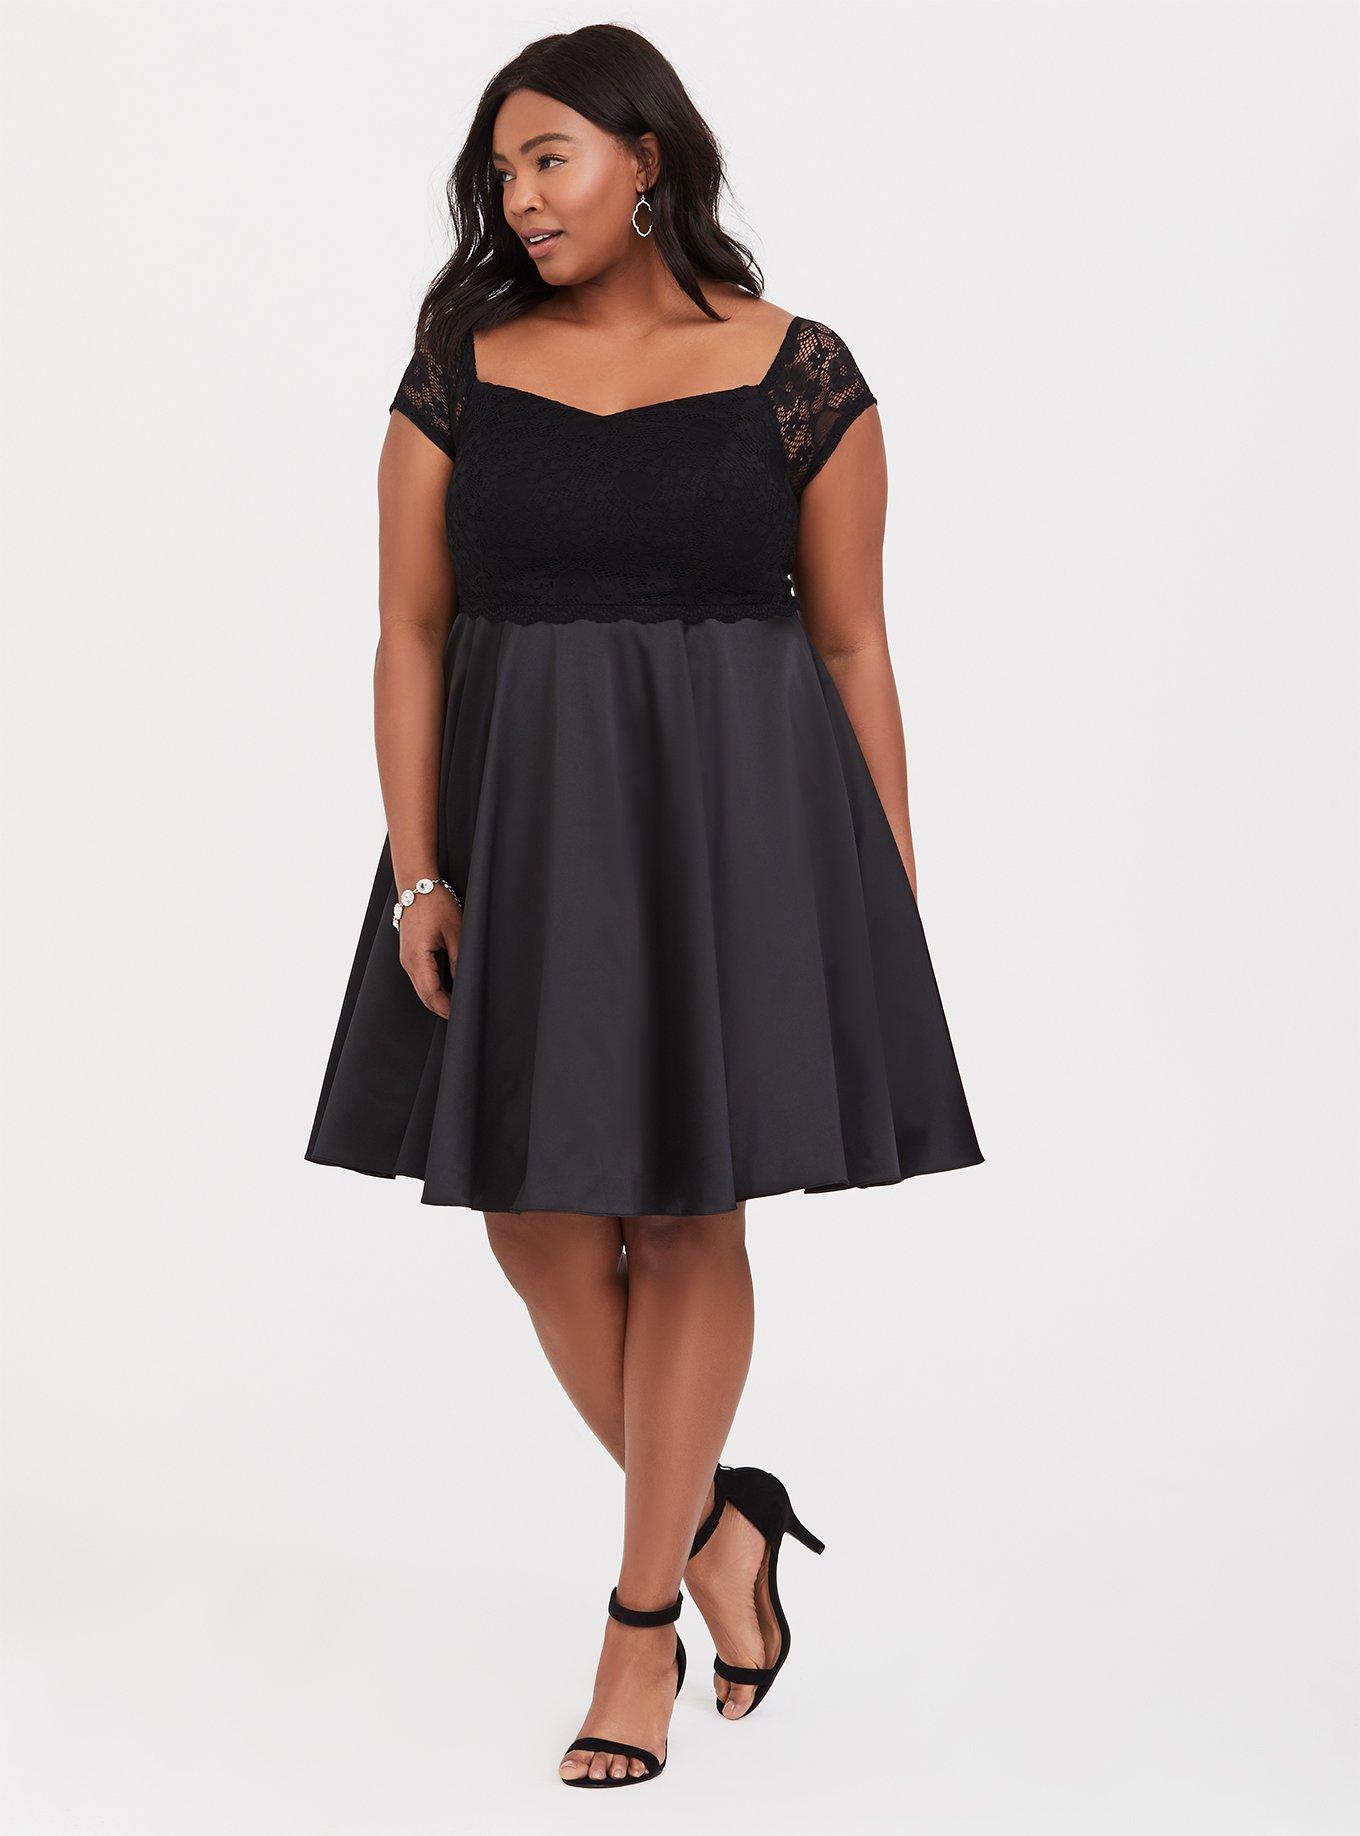 Torrid Black MIDI LACE AND TULLE Special Occasion DRESS Plus Size 20 $118  NWT